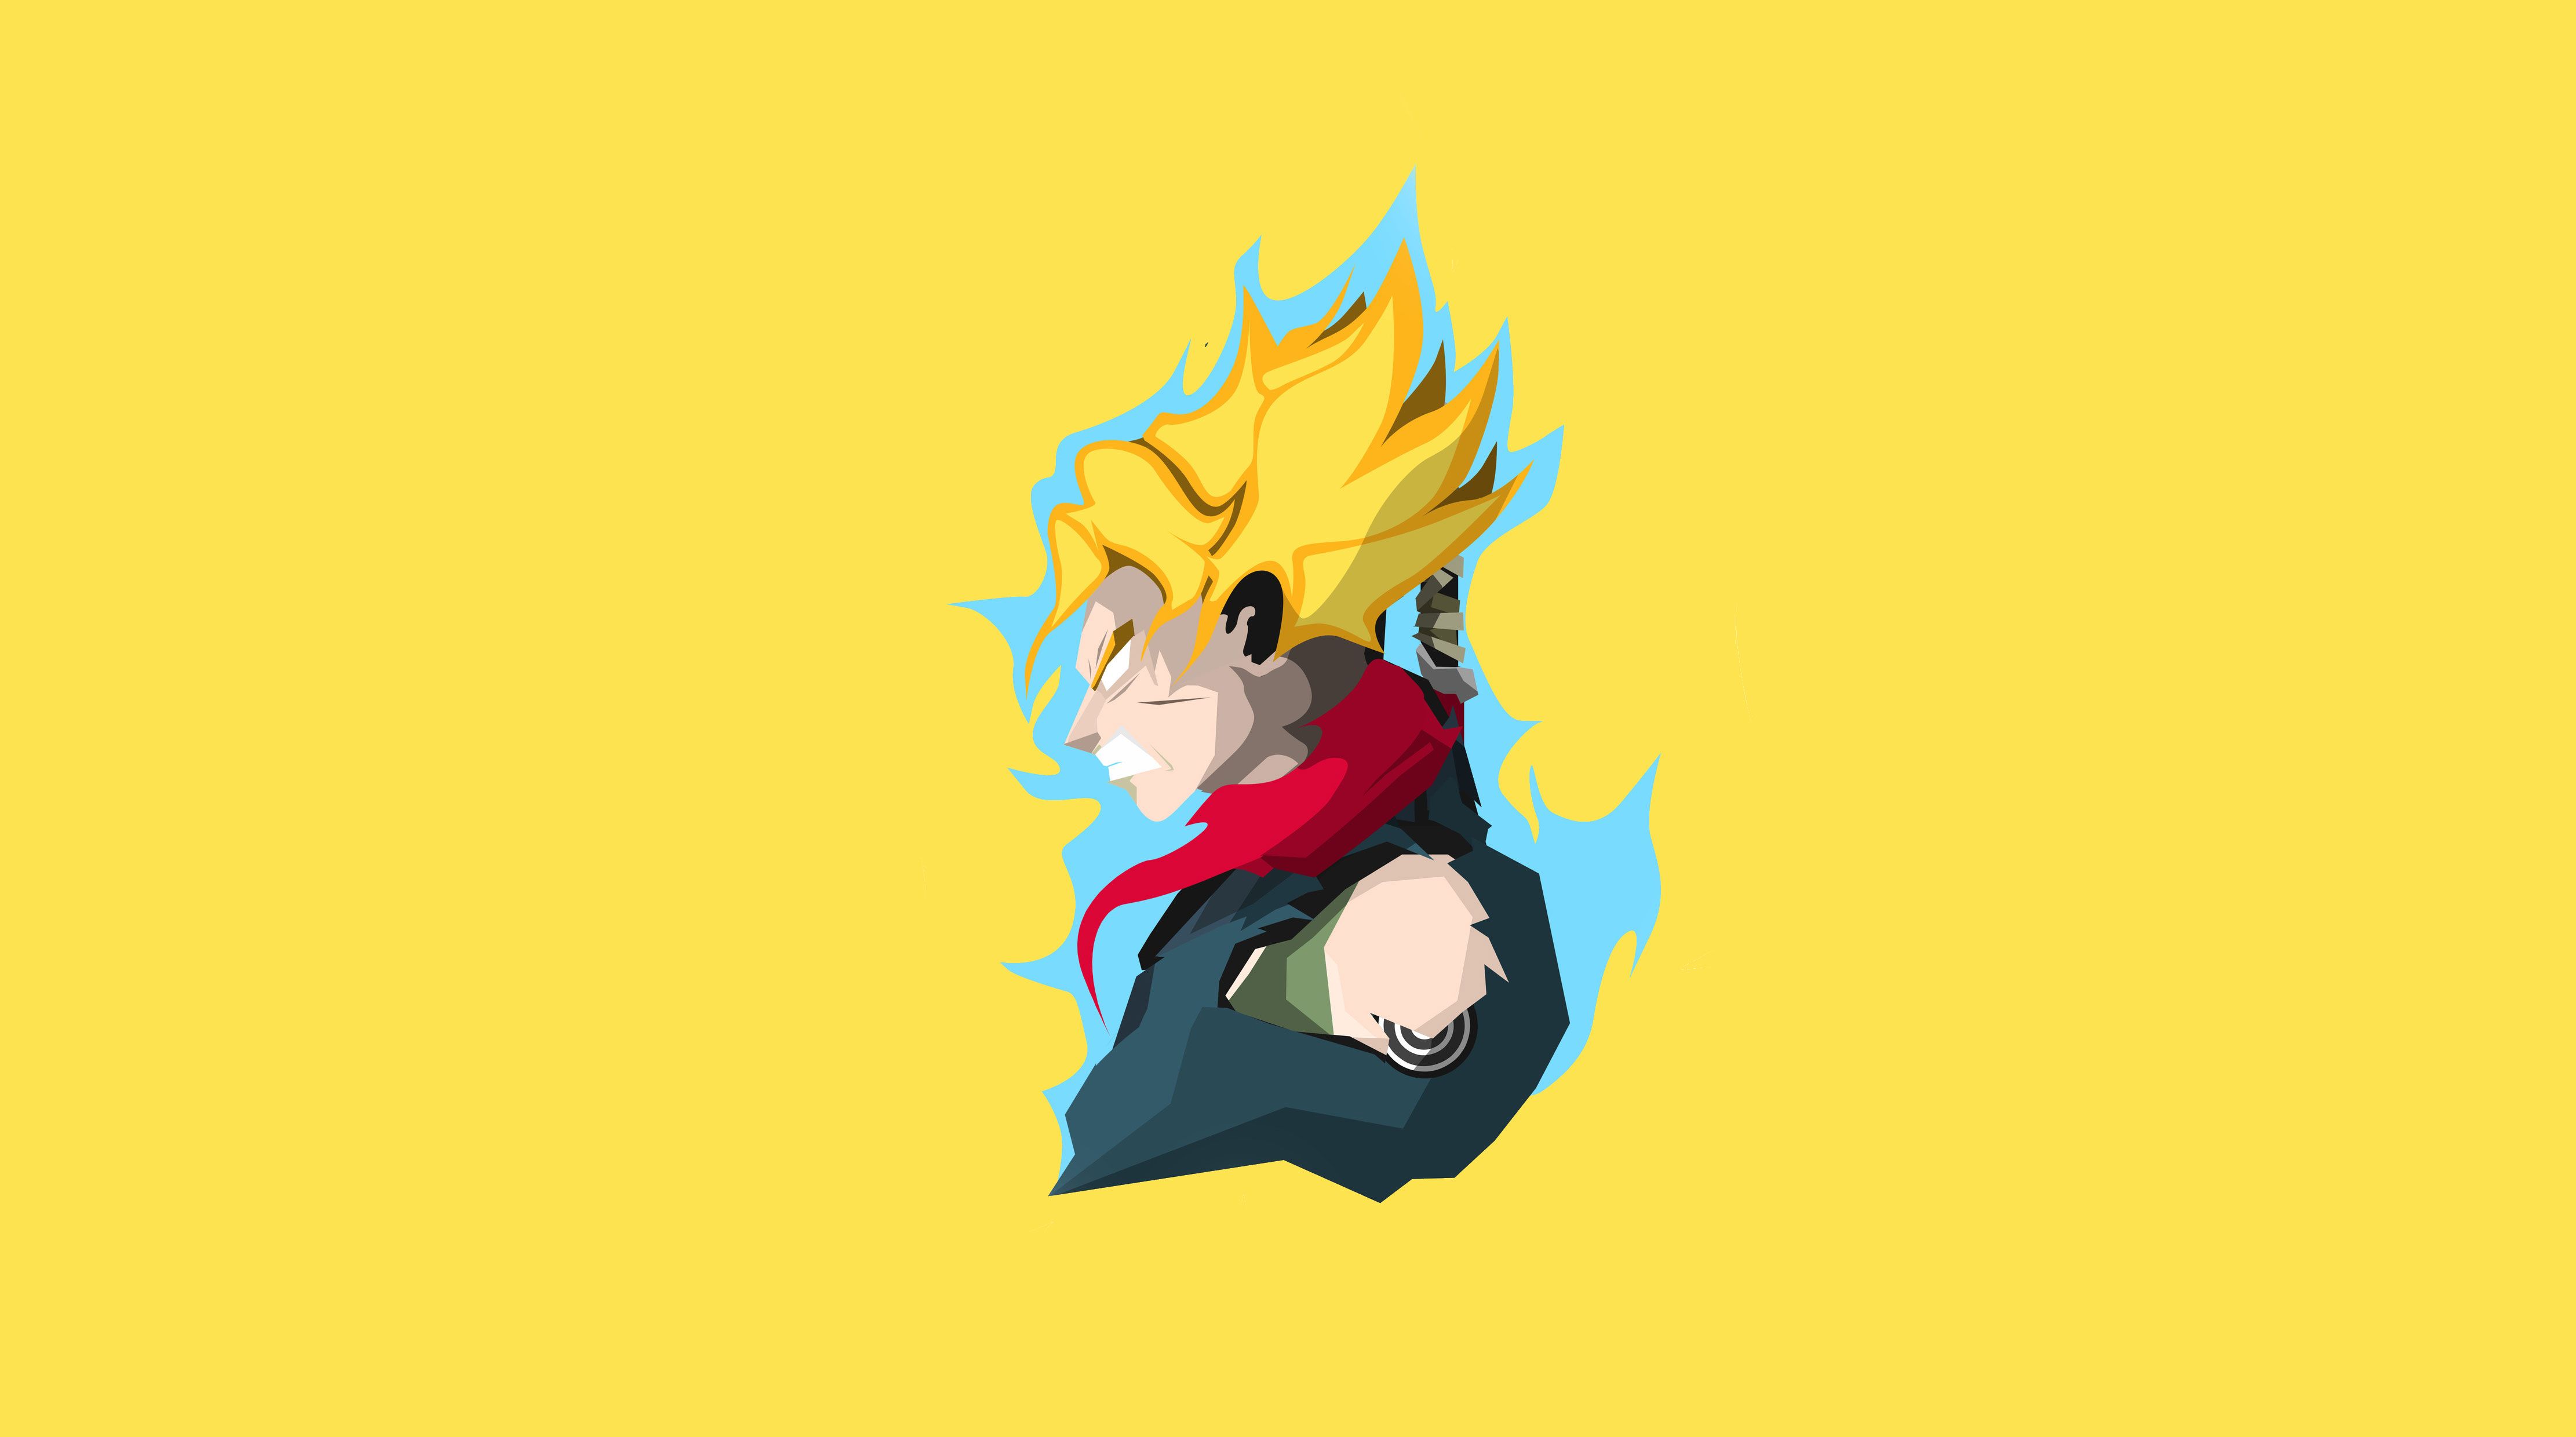 Son Goku Dragon Ball Super 4k Minimalism iPhone iPhone 4S HD 4k Wallpaper, Image, Background, Photo and Picture